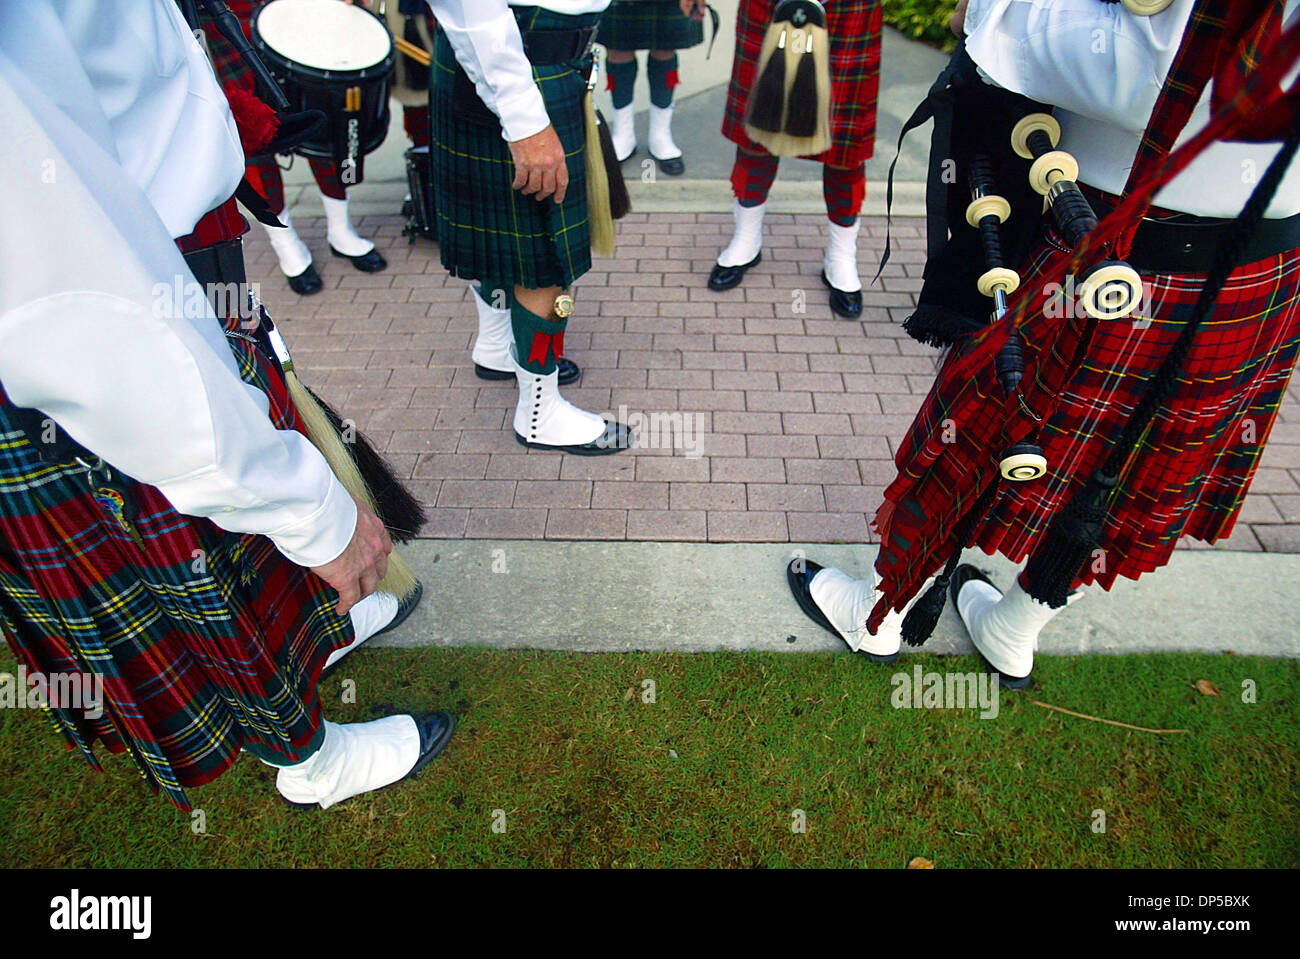 Sep 11, 2006; West Palm Beach, FL, USA; Members of Palm Beach County Pipes and Drums get organized before participating in a memorial held Monday morning at the Meyer amphitheater to remember those who died in the September 11 terroist attacks.  Firefighters from across southern Florida joined together at the Meyer Amphitheater to 'never forget' and honor the 343 firefighters who d Stock Photo